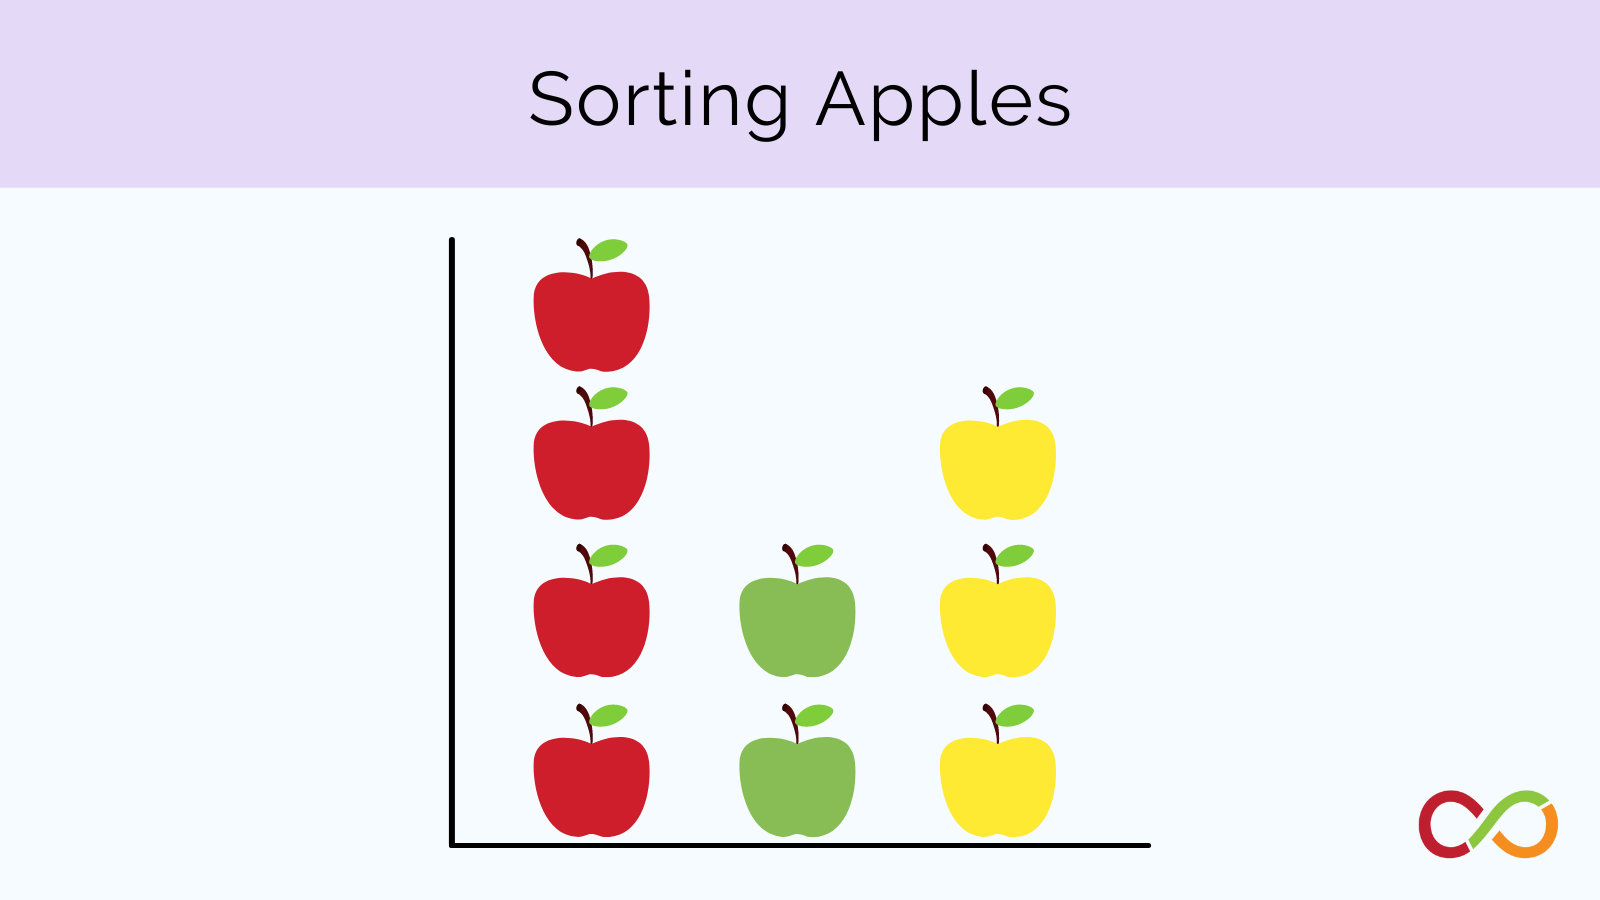 An image linking to the sorting apples lesson